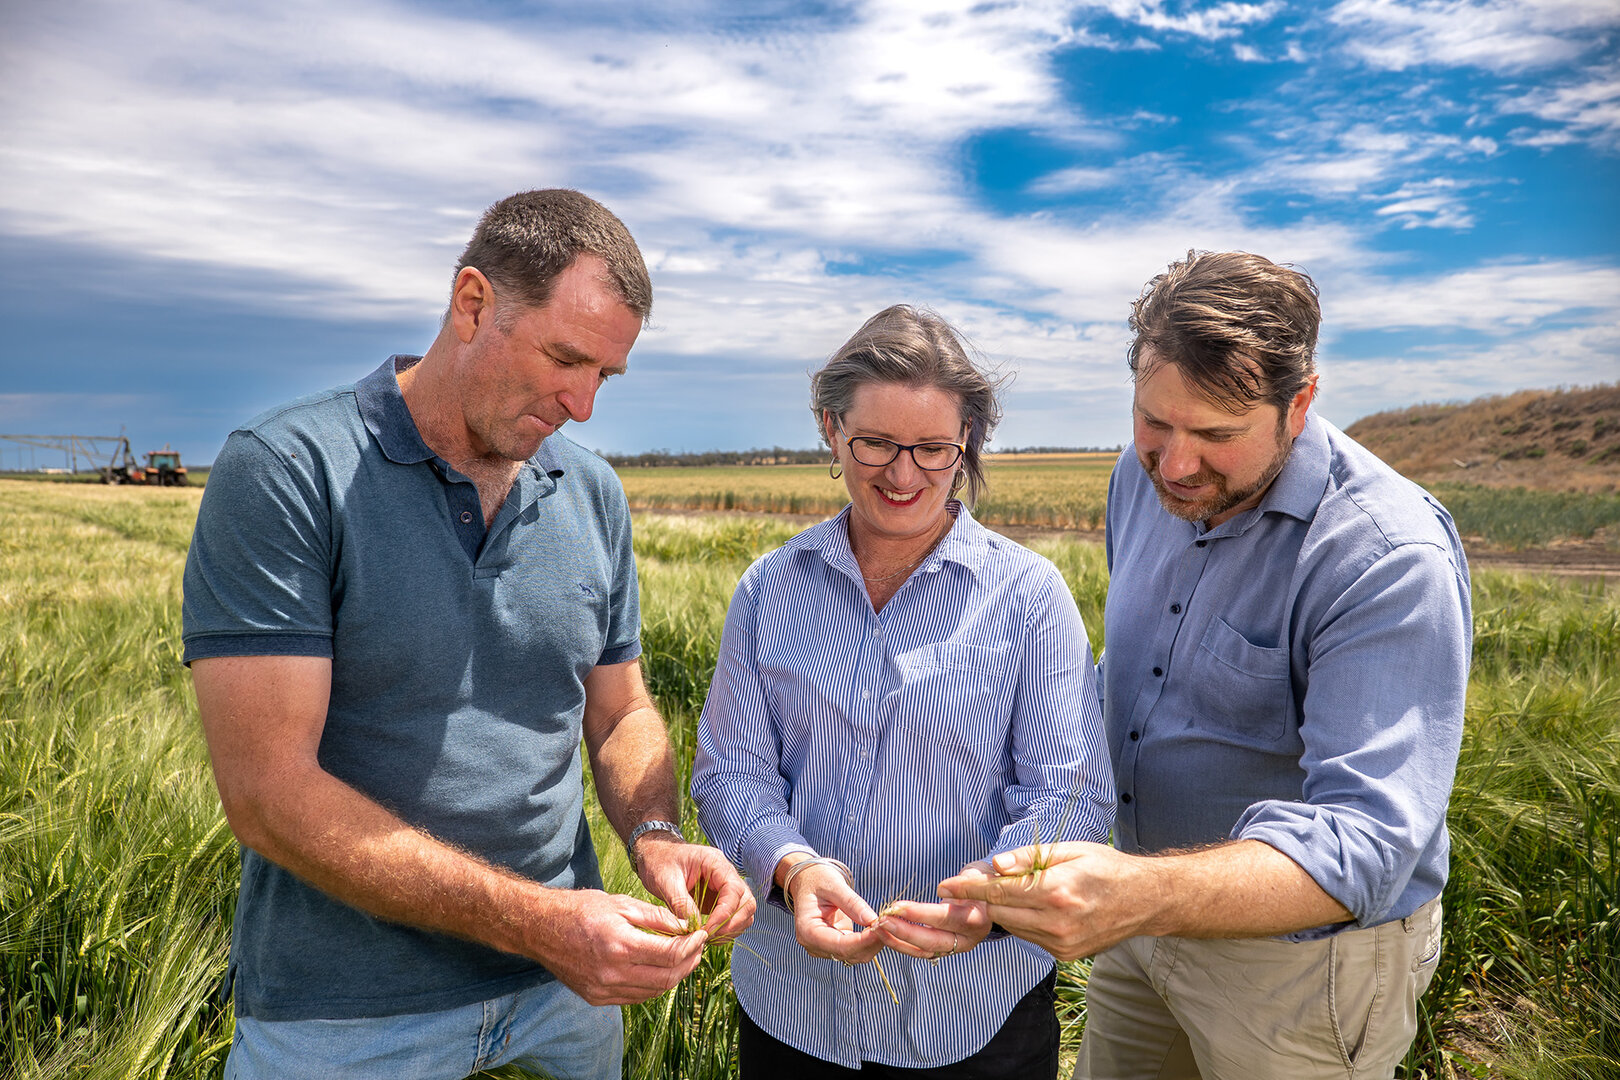 Majella, Paul, and Keith stand together in a field looking closely at their crops. Majella is holding some in her hand.